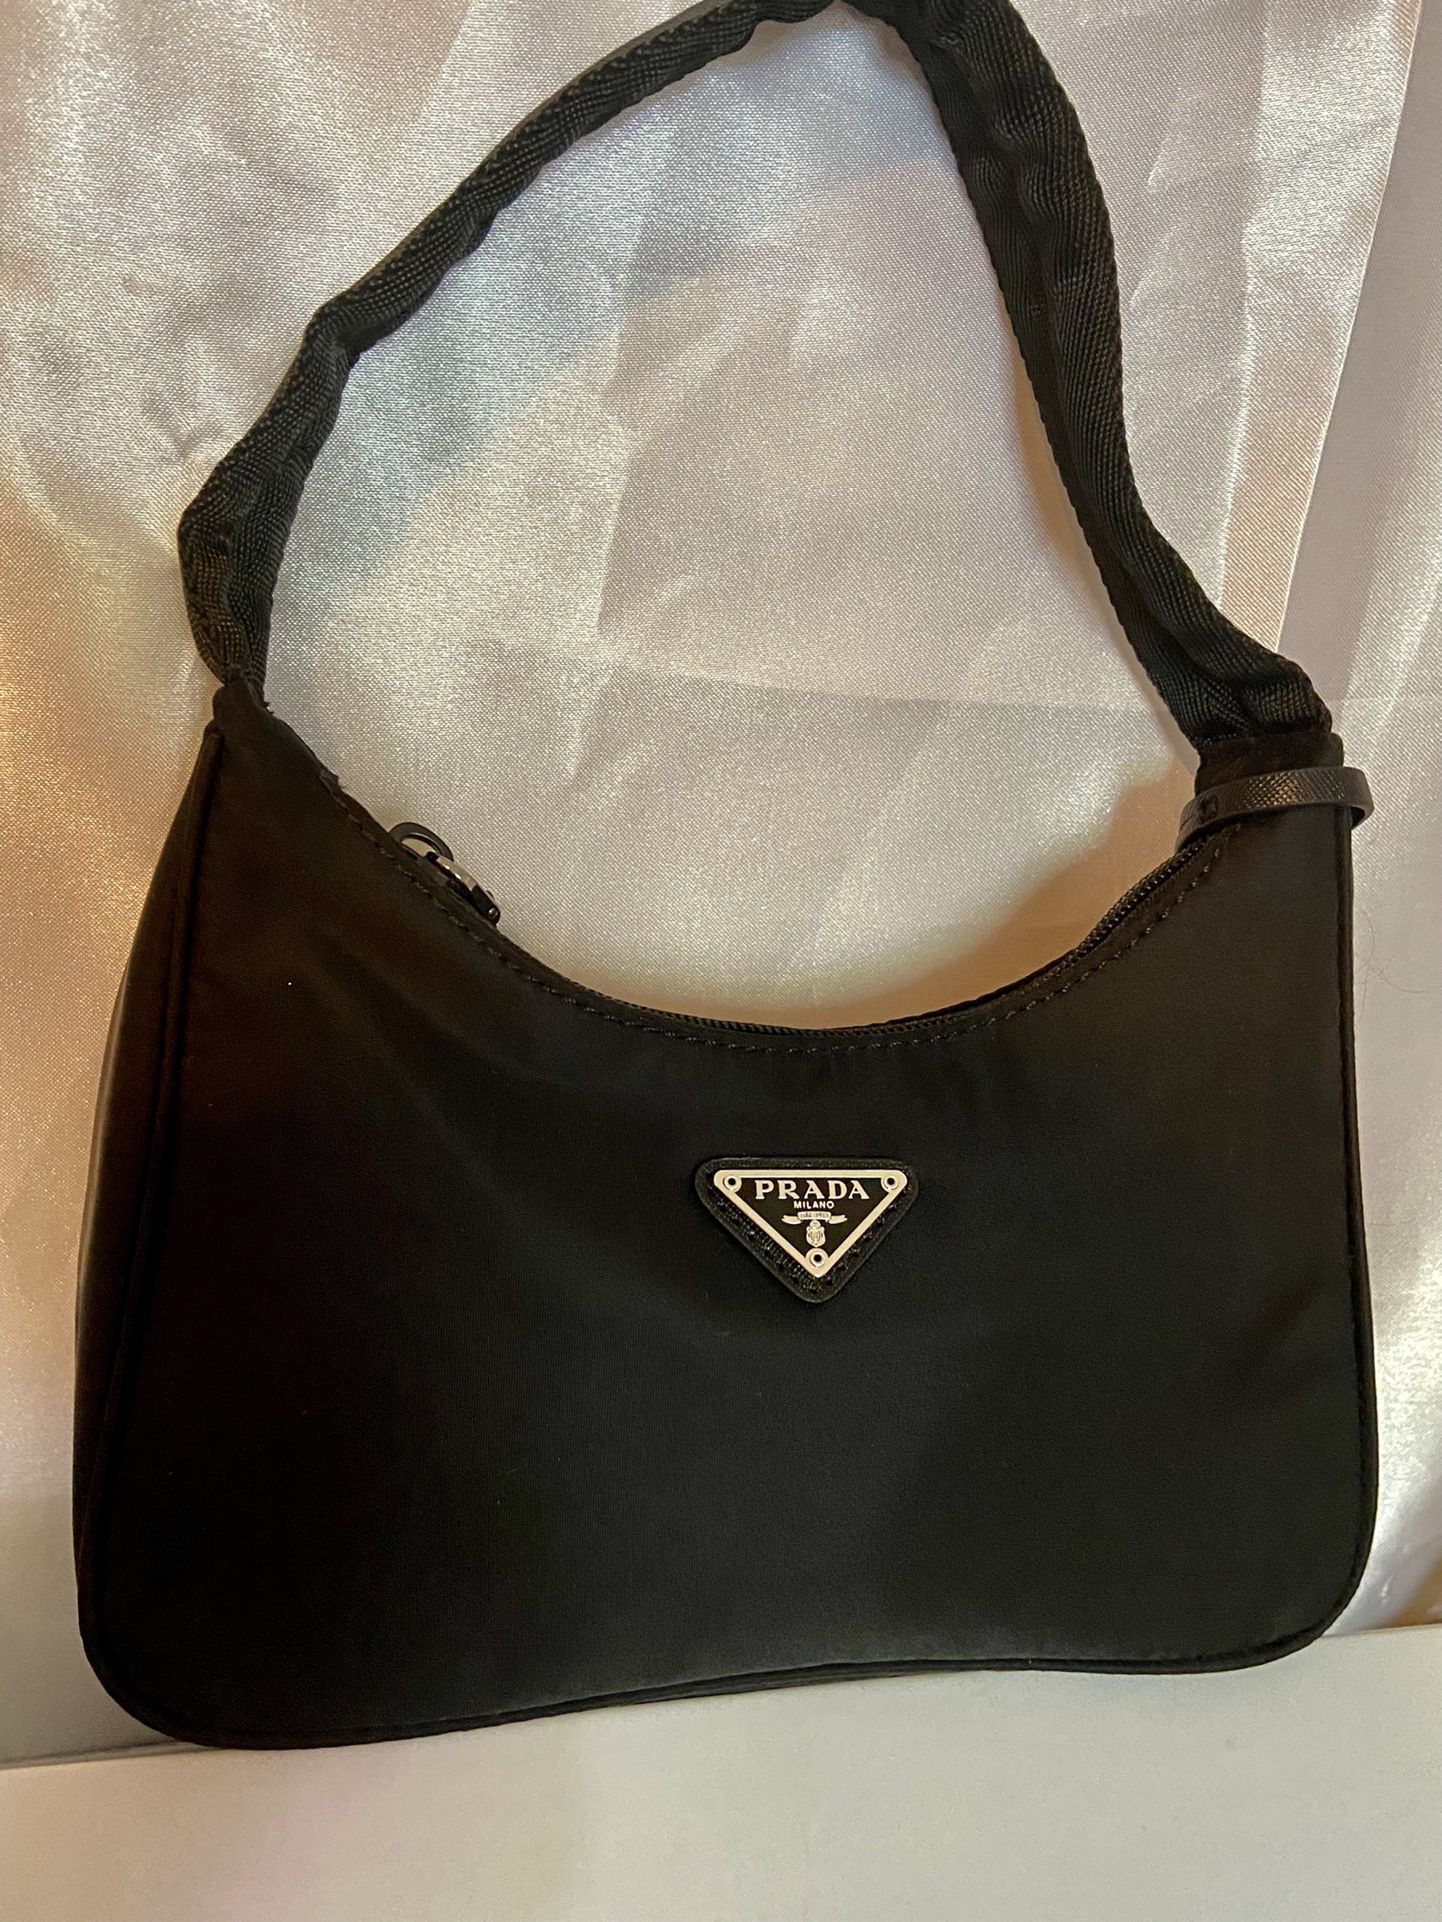 AKAIV Los Angeles purse for Sale in Louisville, KY - OfferUp